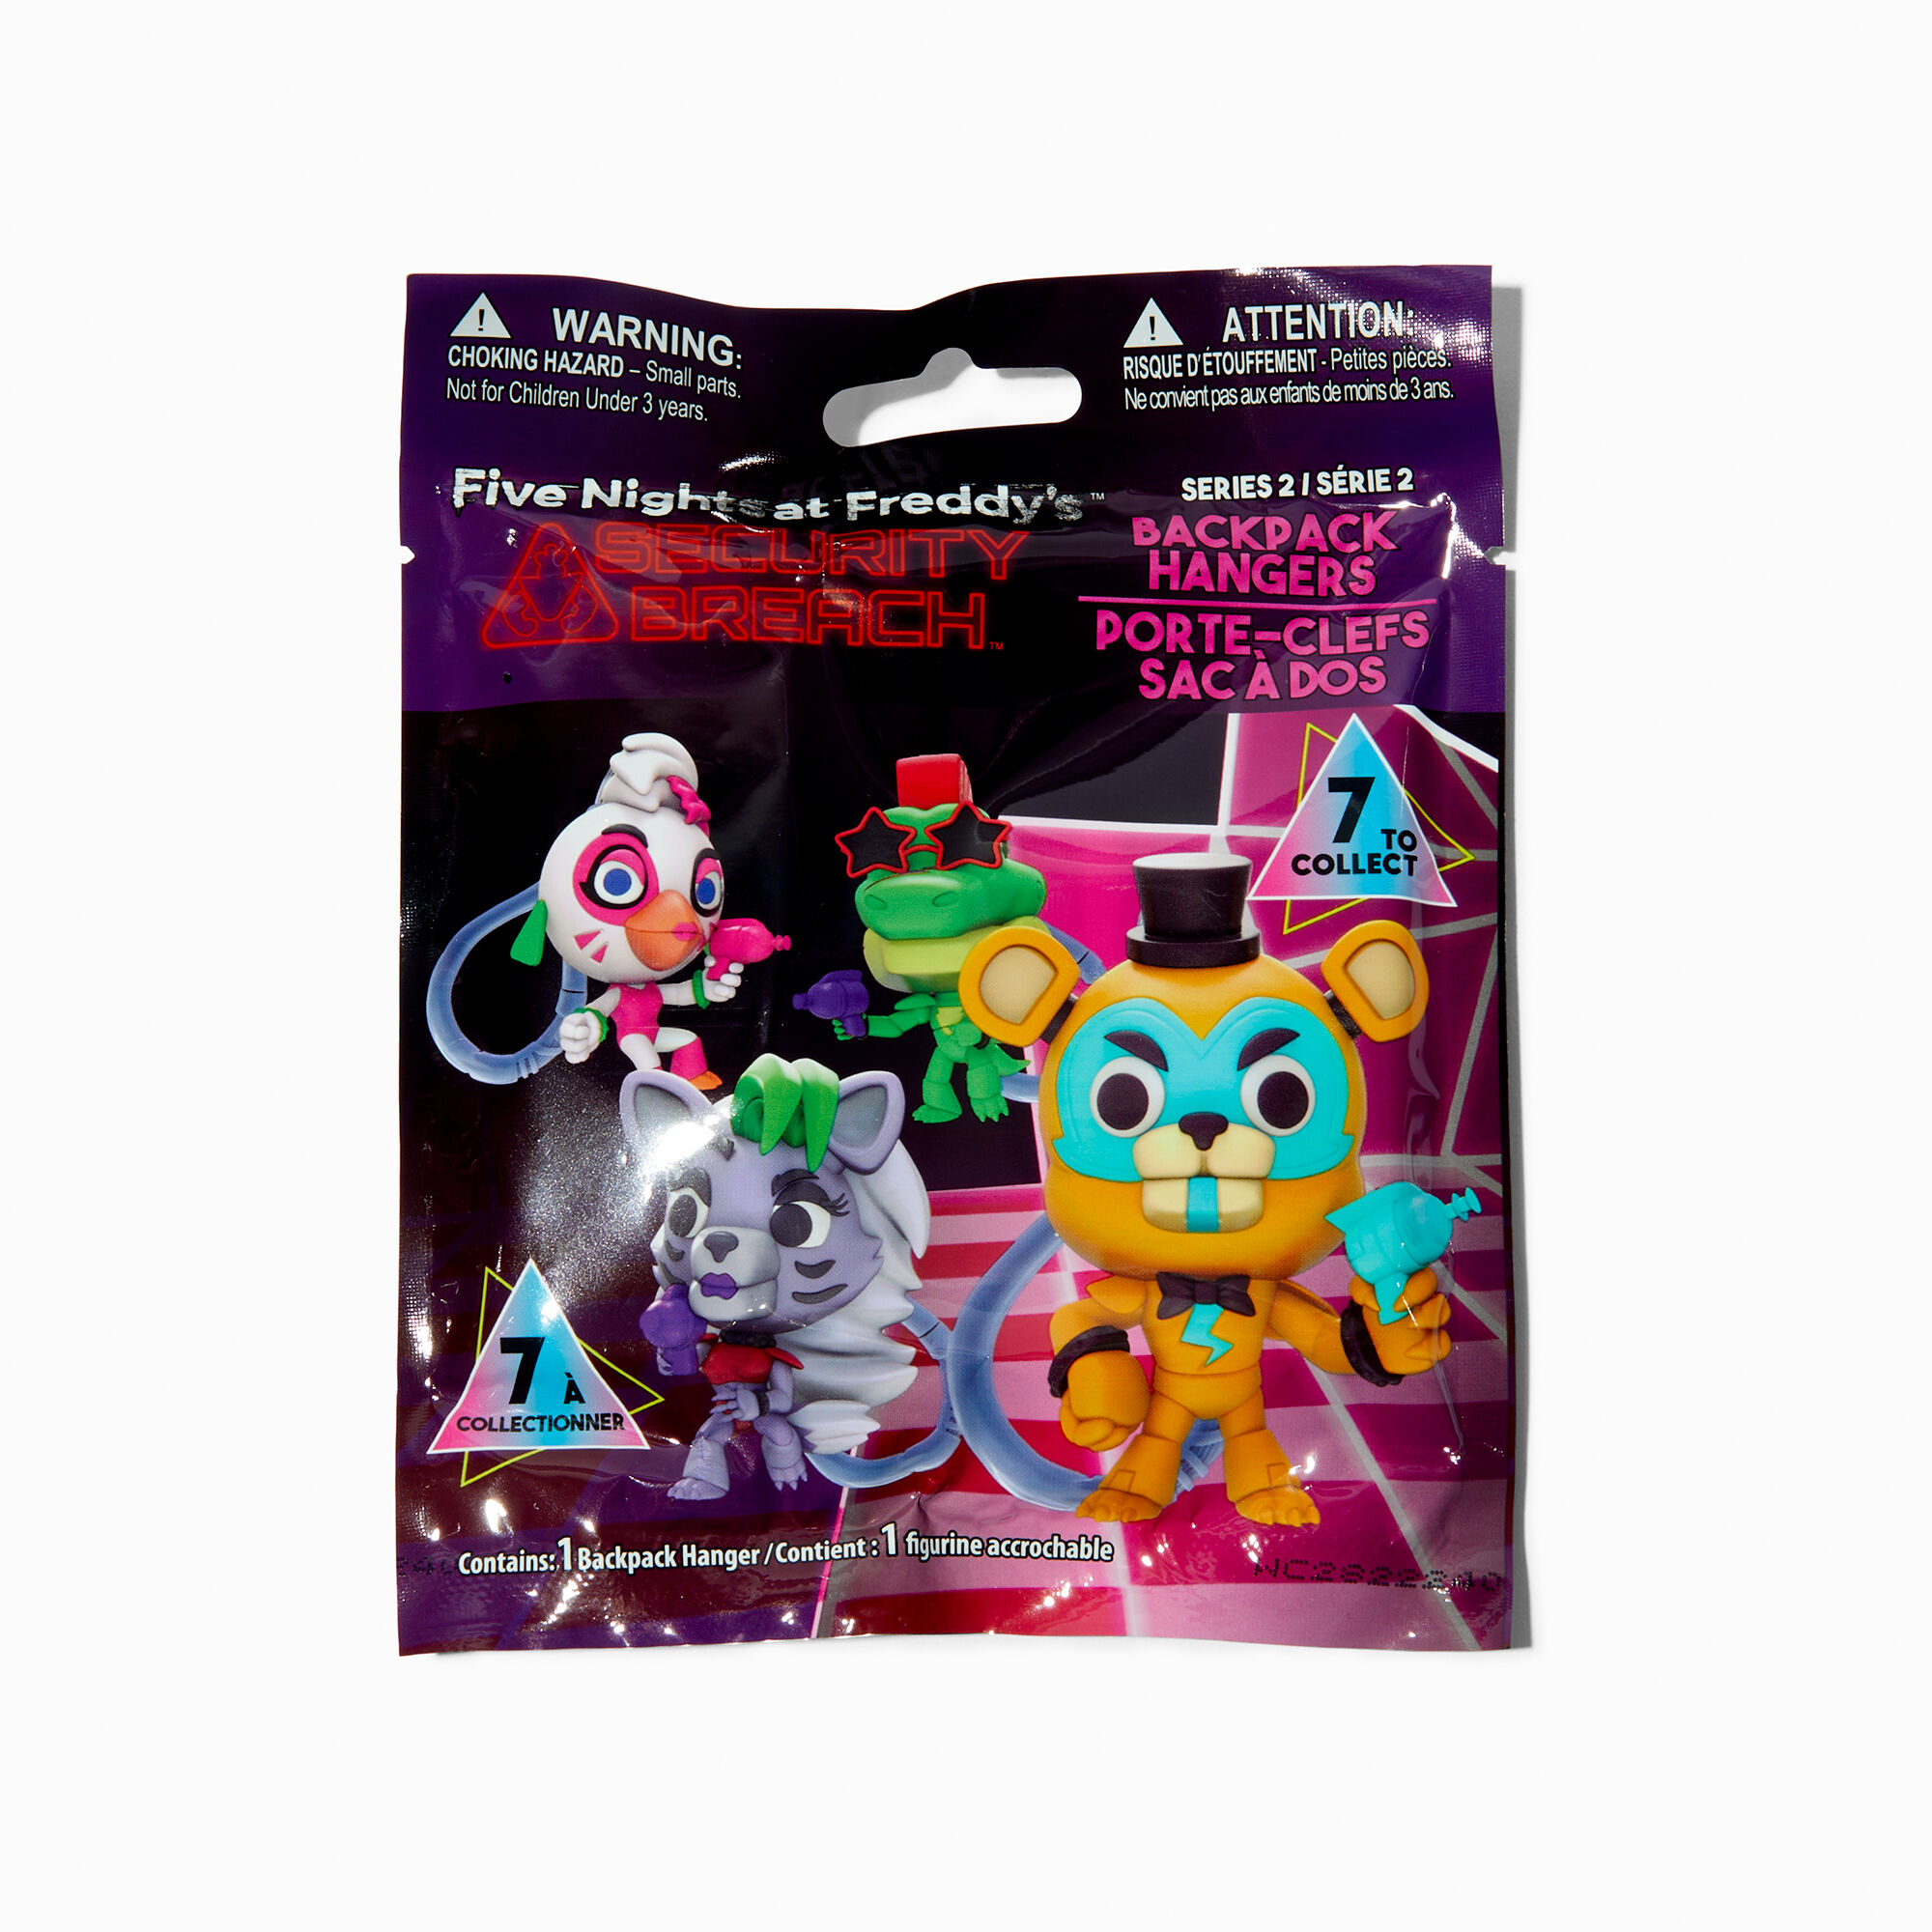 View Claires Five Nights At Freddys Security Breach Backpack Hangers Surprise Bag information